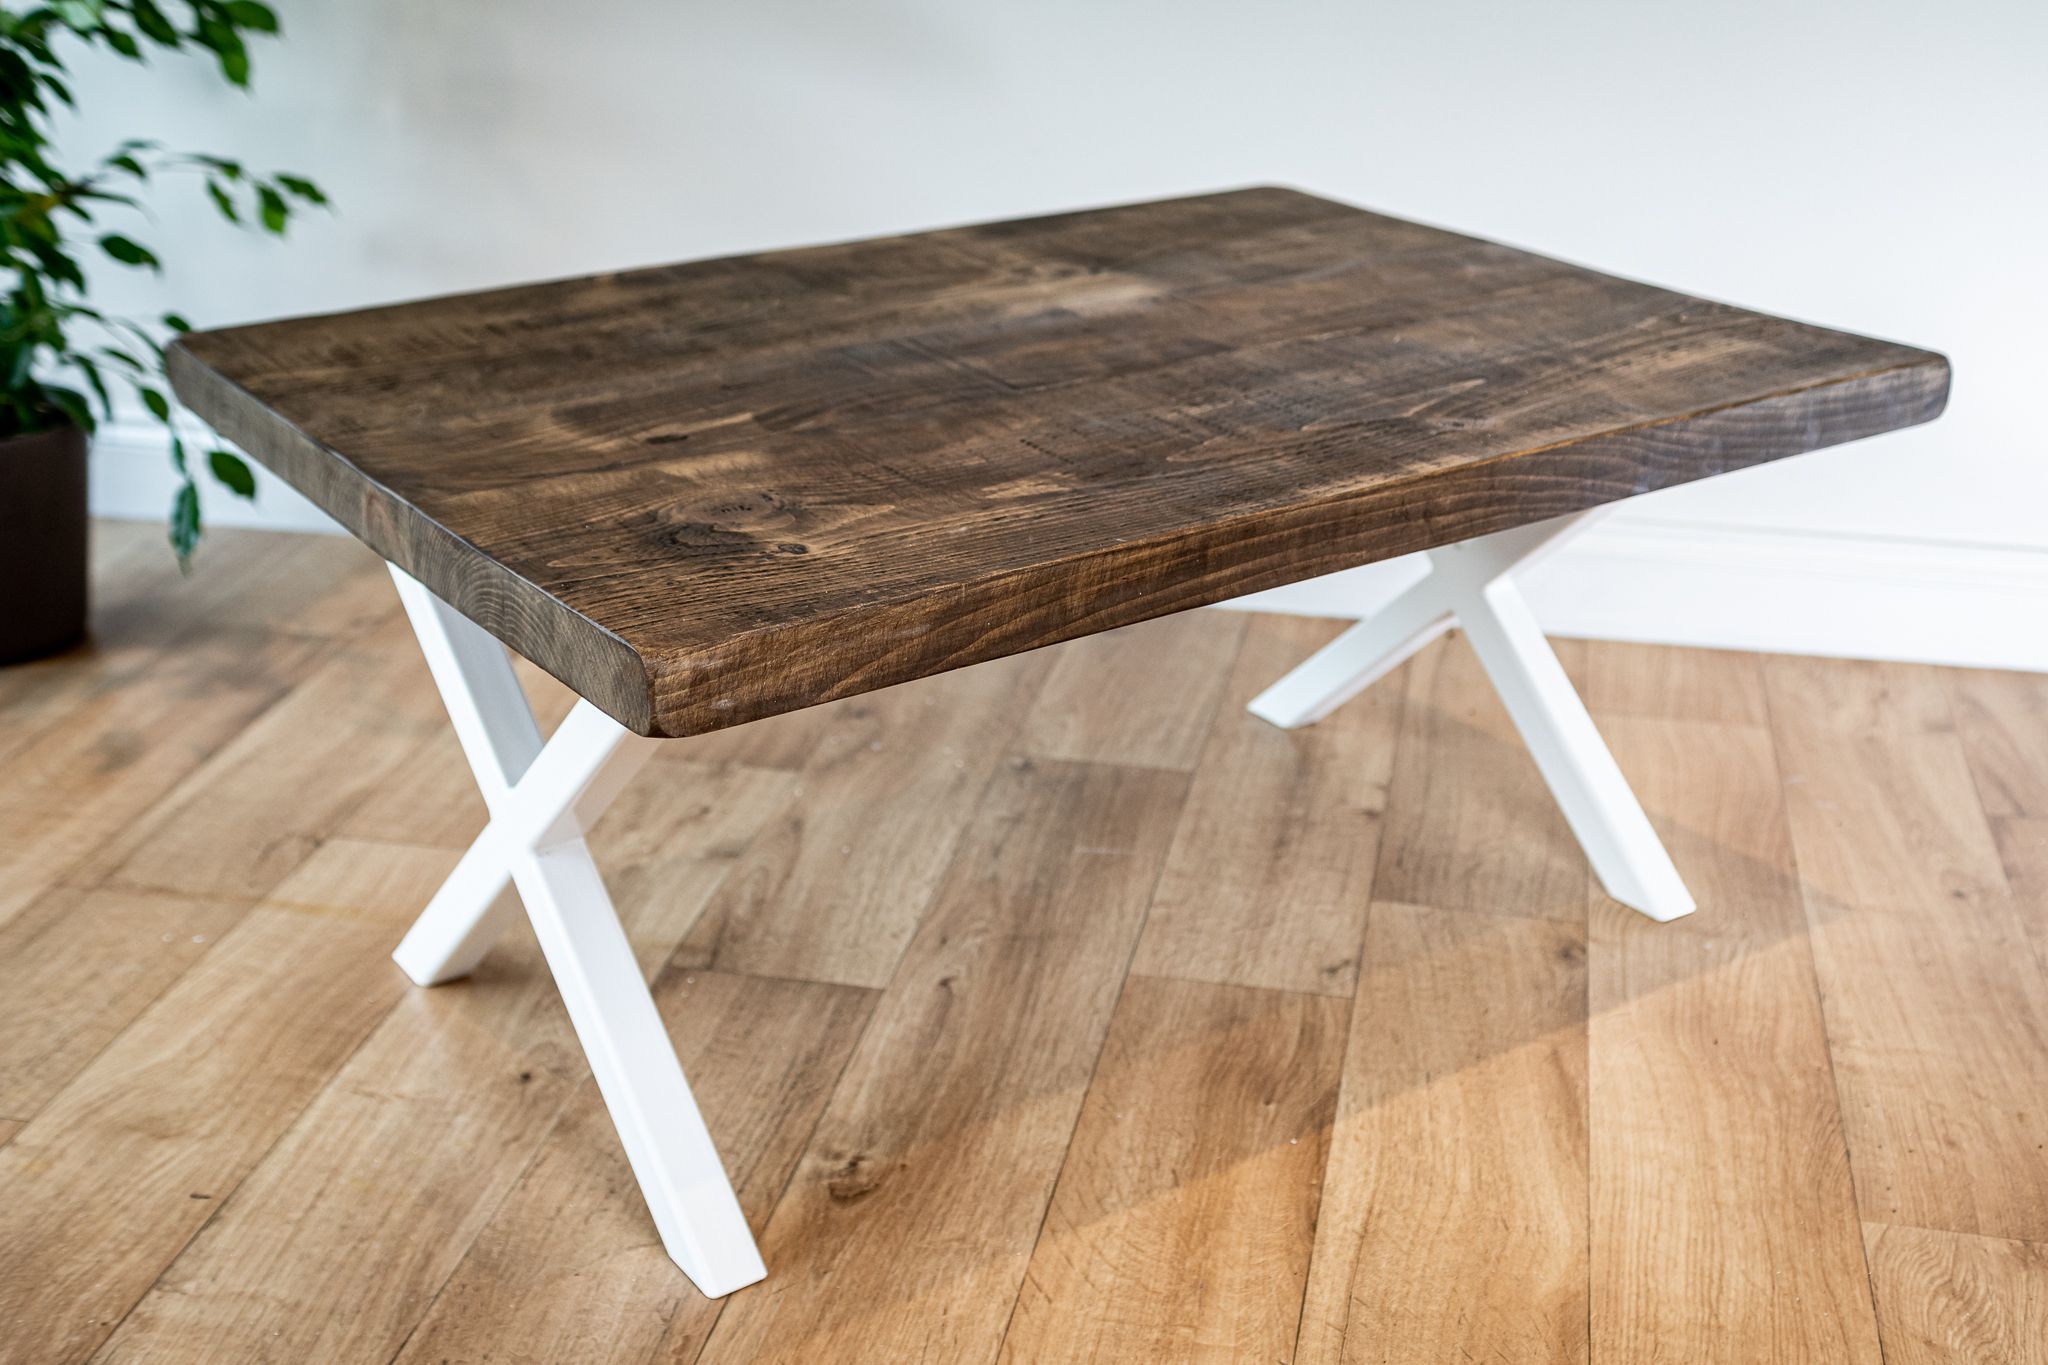 Fashionable Industrial Coffee Table With White Metal Legs X Frame And With Regard To Metal Legs And Oak Top Round Coffee Tables (View 8 of 20)